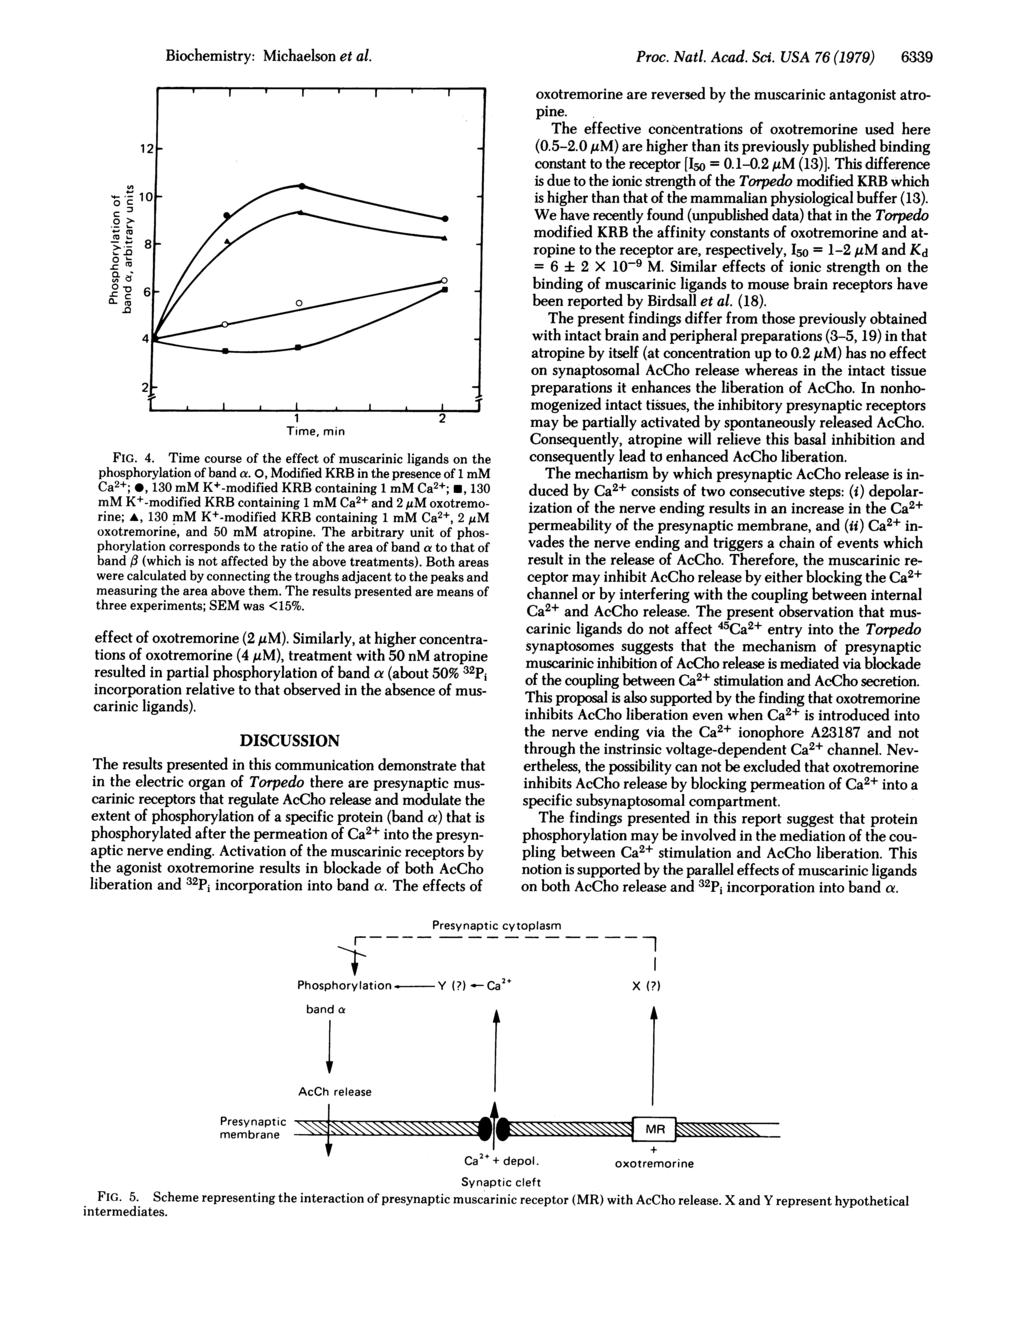 Biochemistry: Michaelson et al. Proc. Natl. Acad. Sci. USA 76 (1979) 6339.0 1 2 C :3 ~ ~ ~ ~ Time, mmn FIG. 4. Time course of the effect of muscarinic ligands on the phosphorylation of band a.